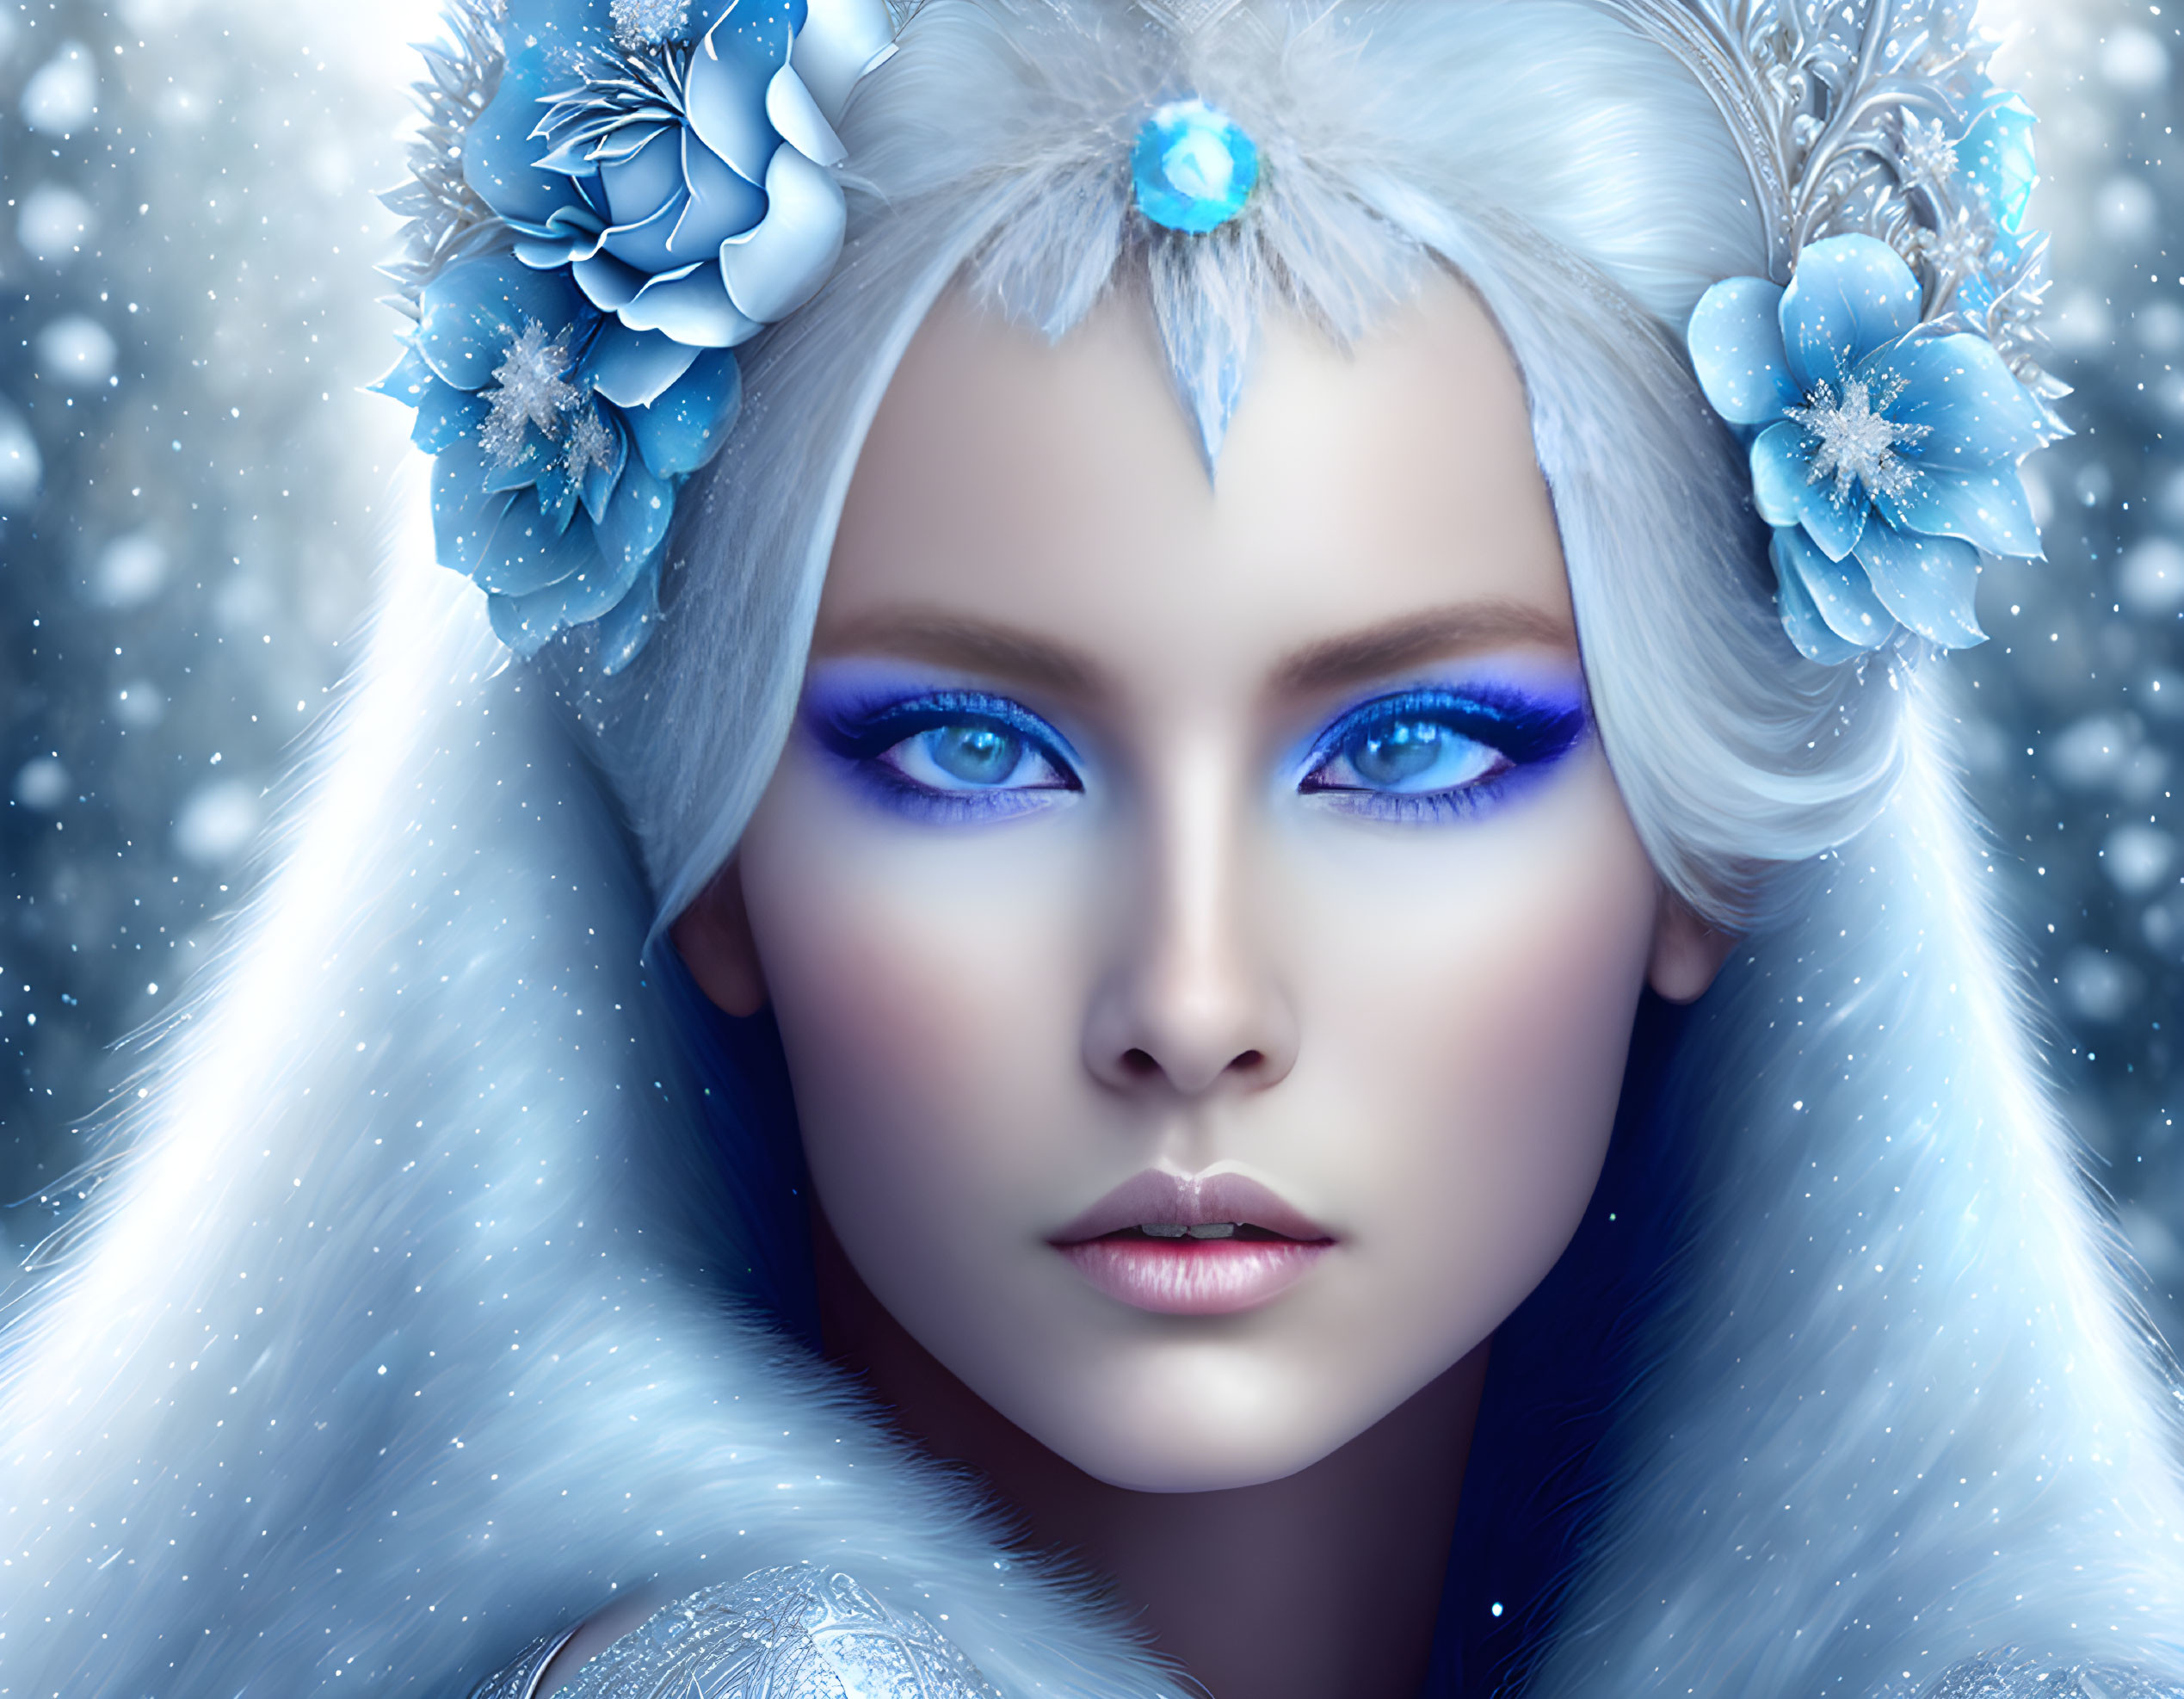 Fantasy illustration of woman with blue eyes, white hair, and wintry aura.